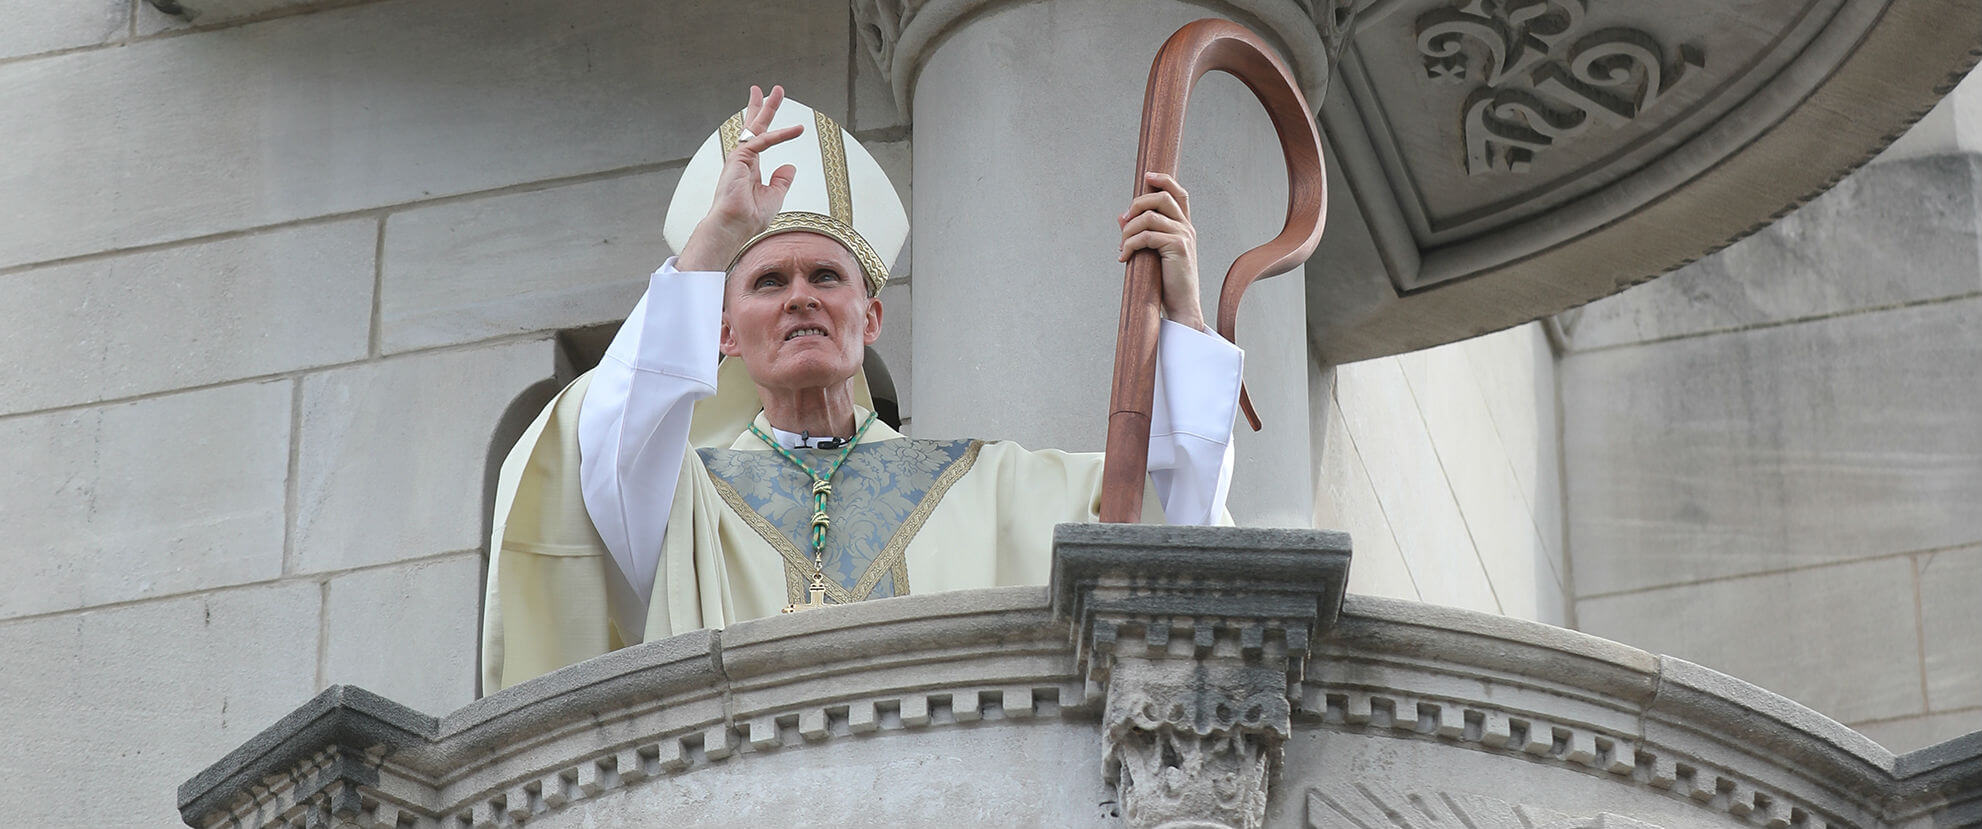 West Virginians meet their new bishop as humble, holy man